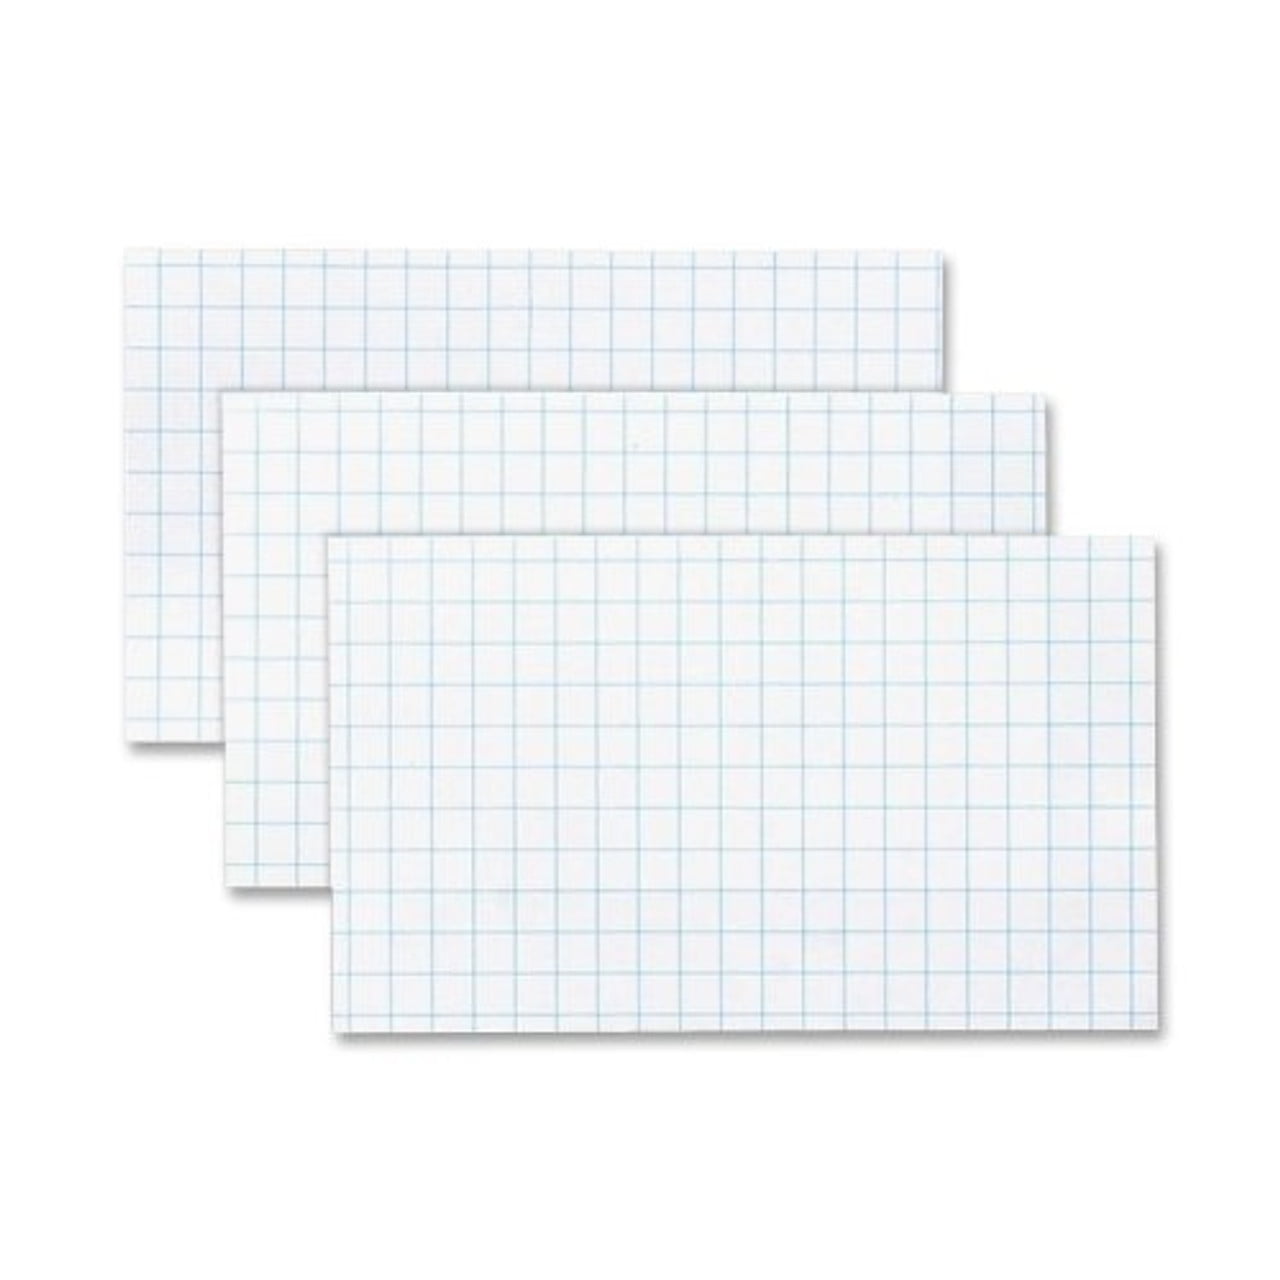 Wausau Exact 30% Recycled Heavyweight Index Card Stock, 8 1/2 x 11, 90 Lb,  White, Pack Of 250 Sheets